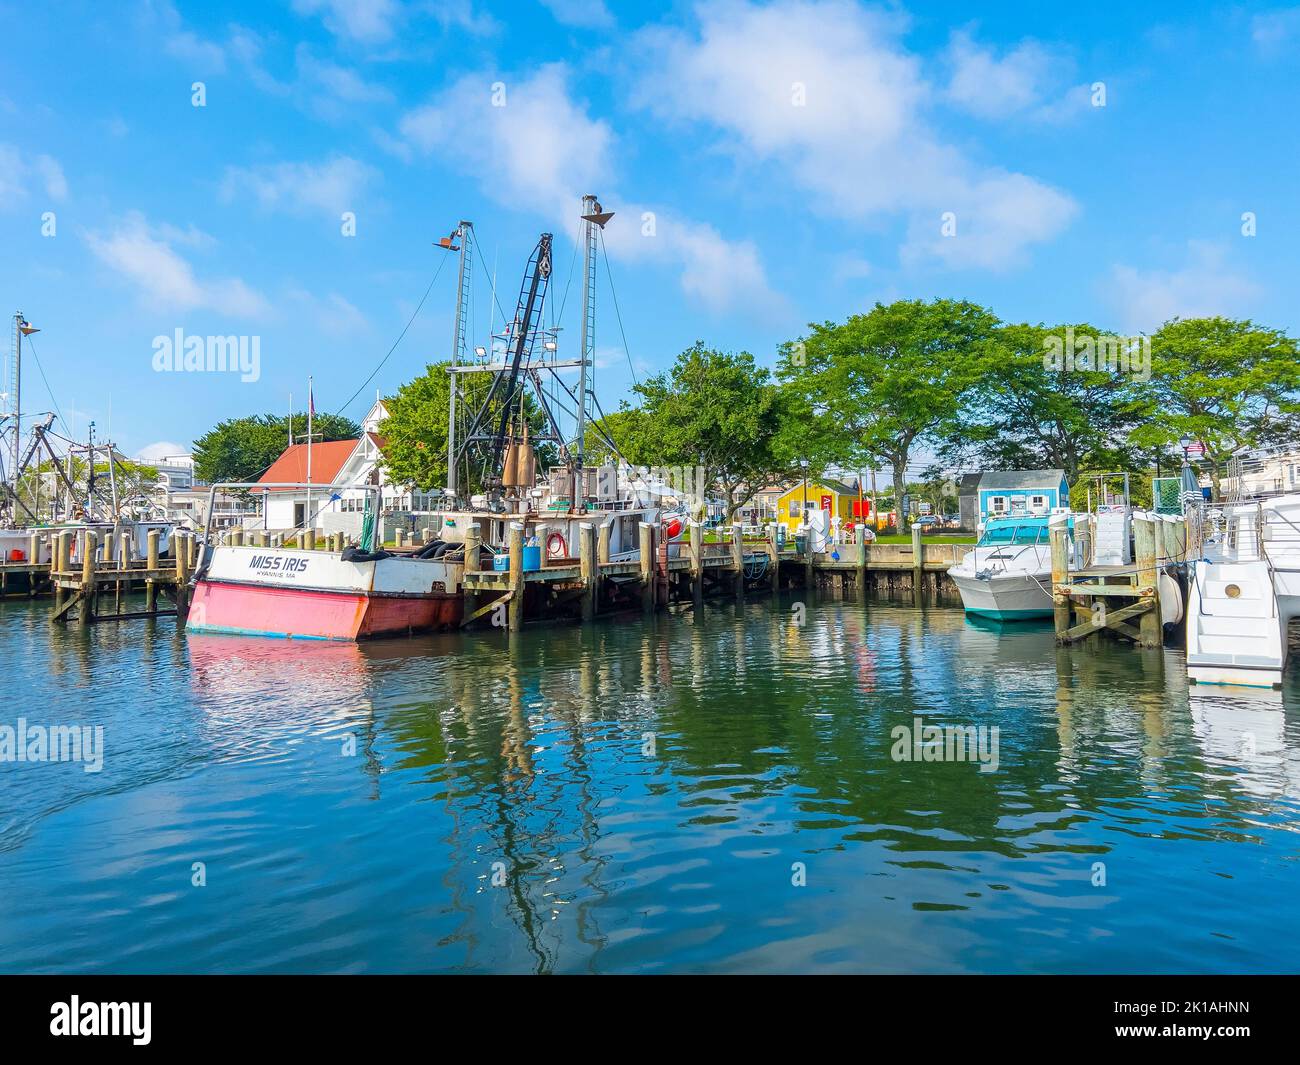 Fishing boat Miss Iris docked at Hyannis Port in town of Barnstable, Cape Cod, Massachusetts MA, USA. Stock Photo